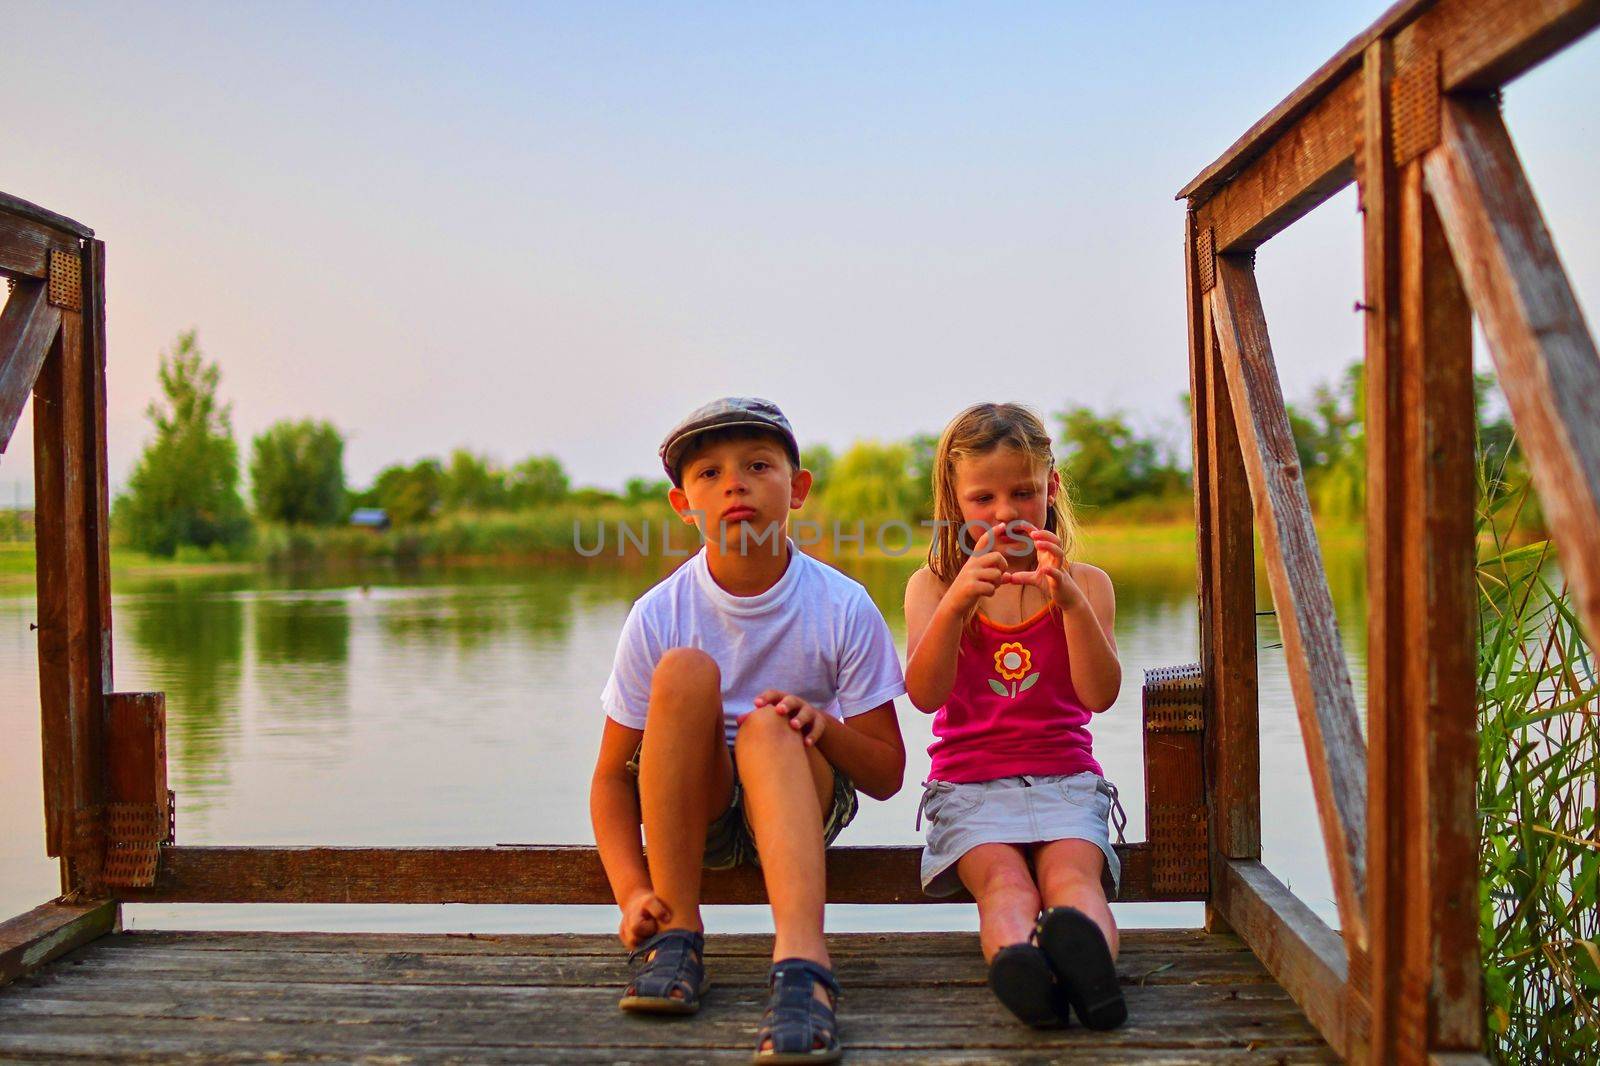 Children sitting on pier. Two children of different age - elementary age boy and preschool girl sitting on a wooden pier. Girl making heart shape. Summer and childhood concept. Children on bench at the lake.